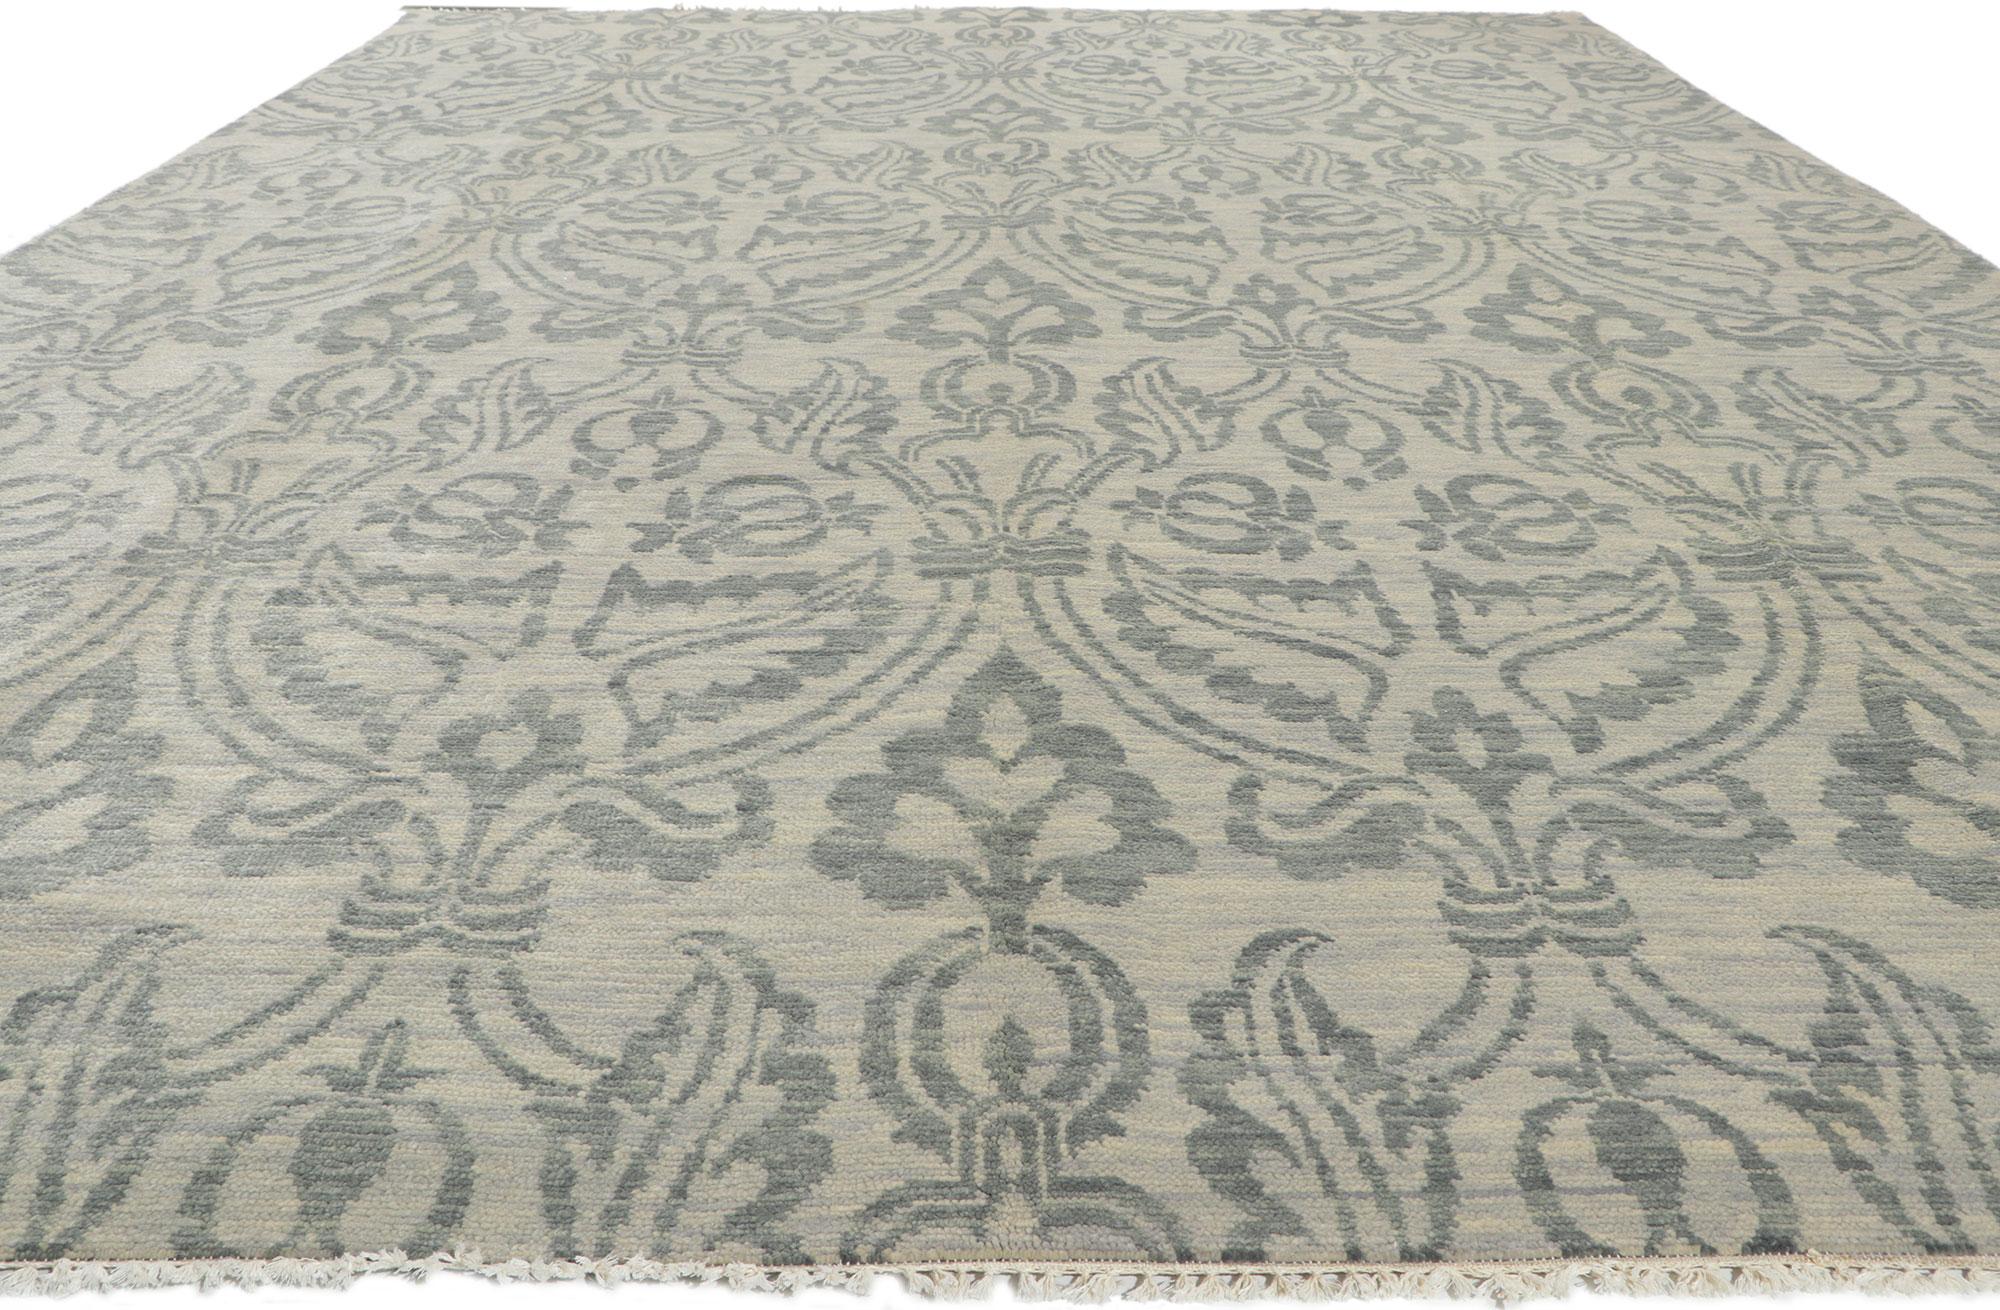 Modern New Transitional Damask Ikat Rug with Blue and Gray Earth-Tone Colors For Sale